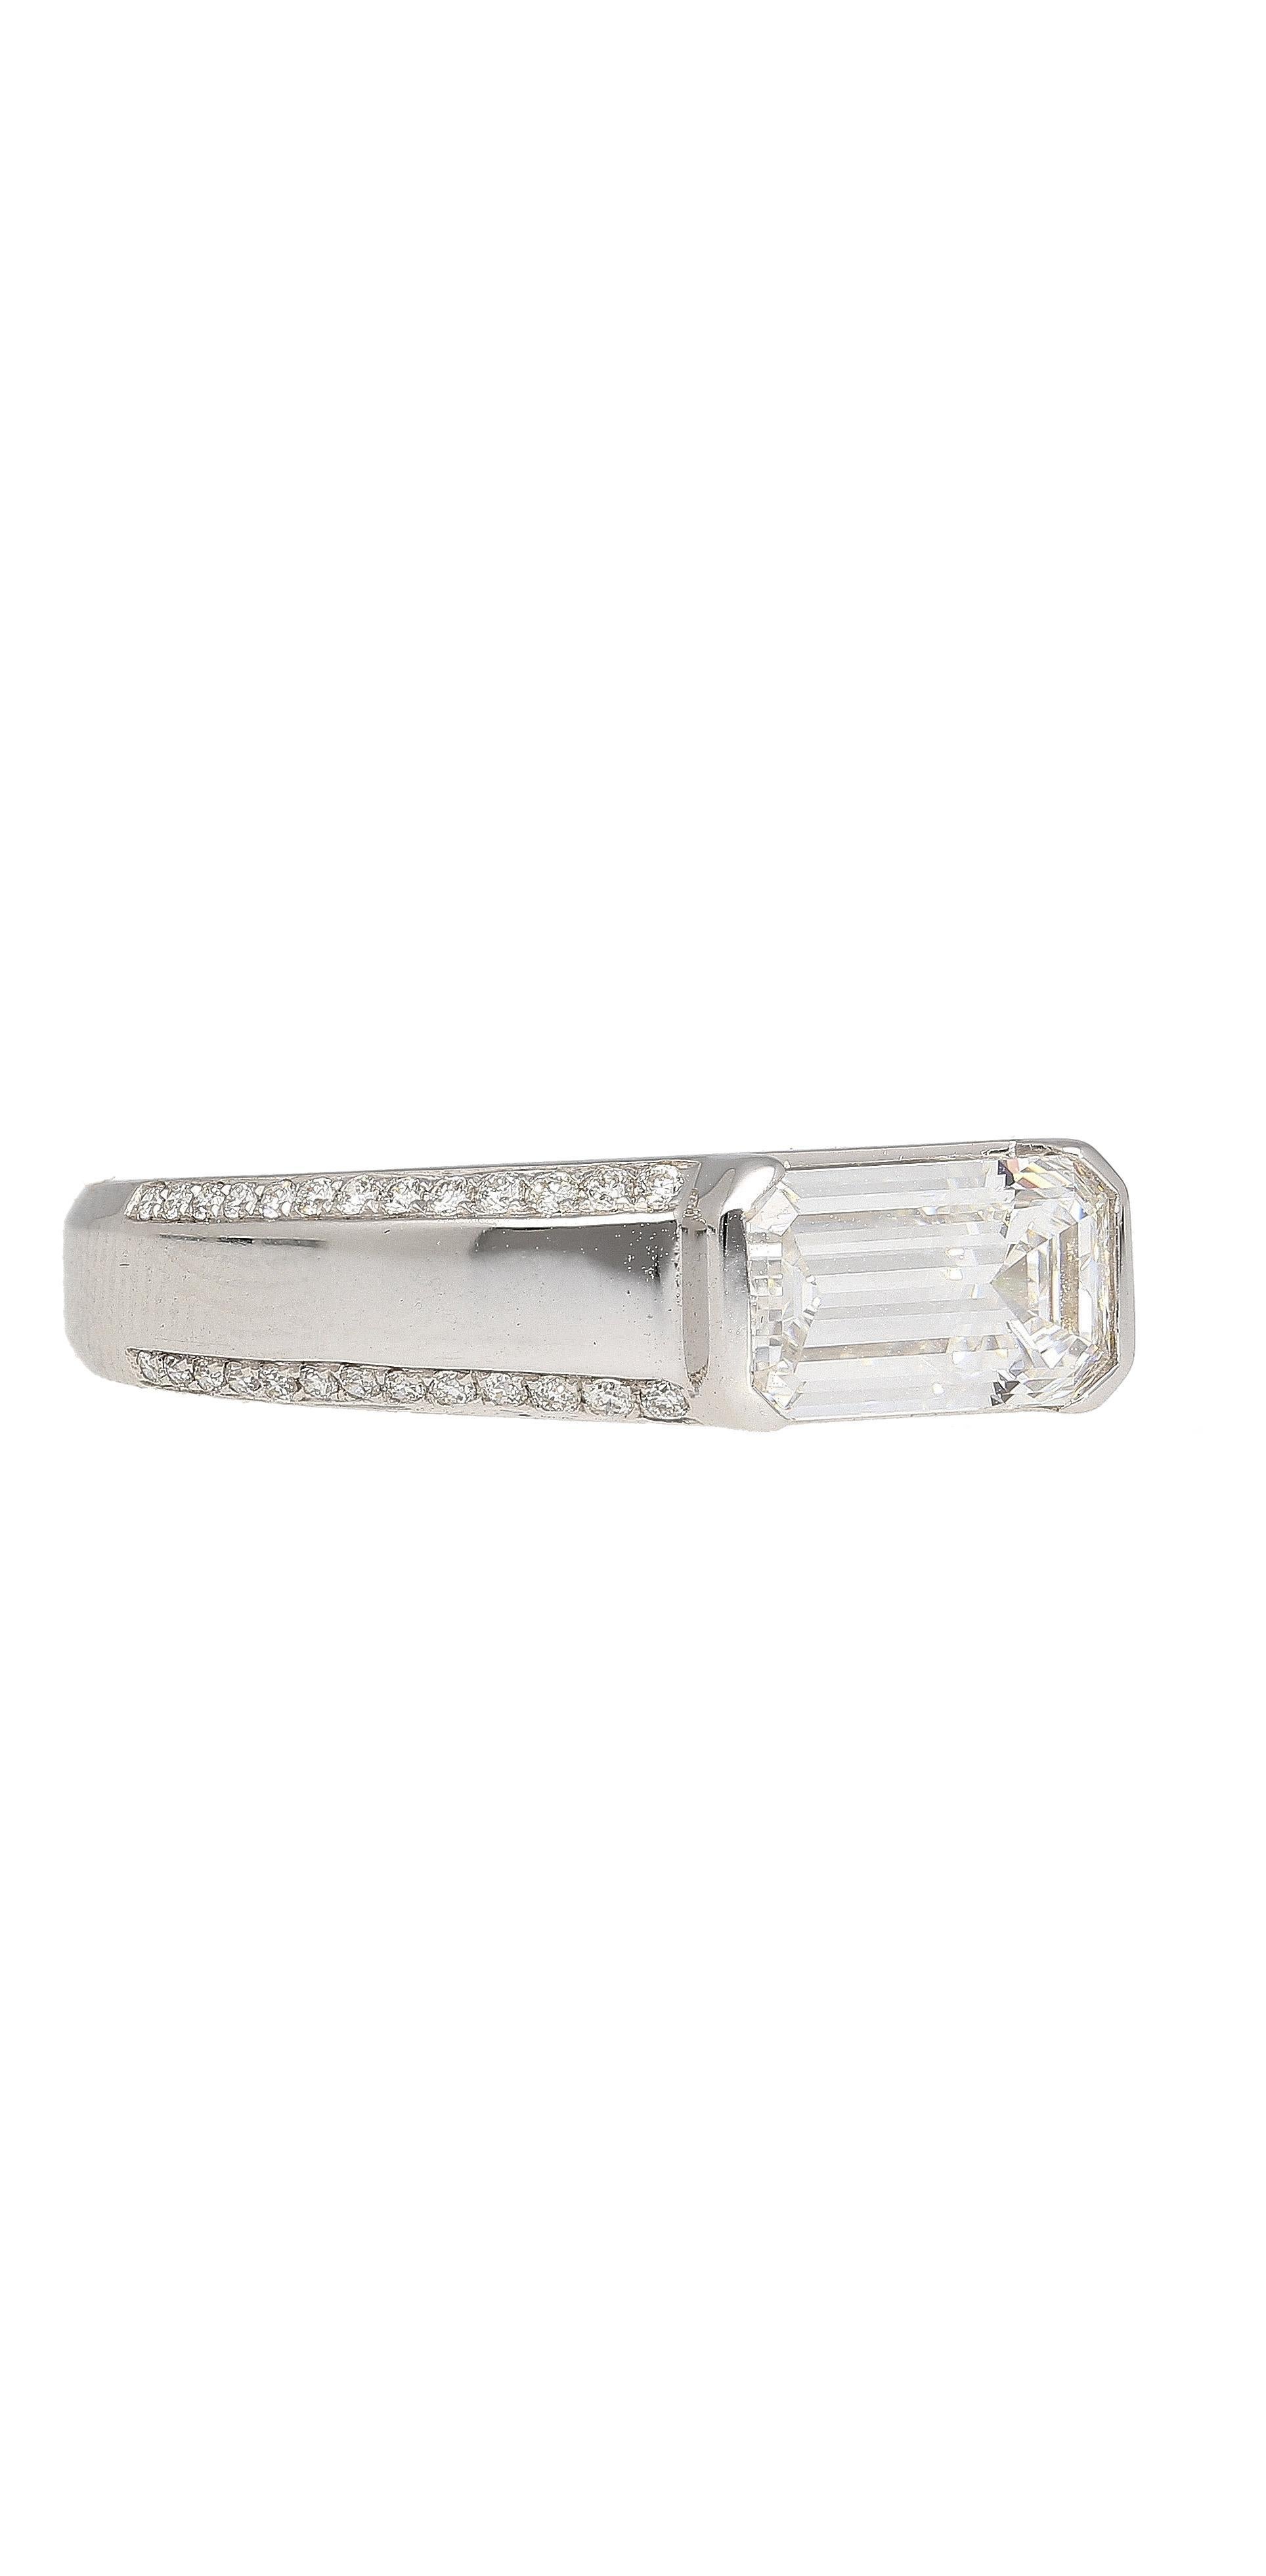 Women's or Men's GIA Certified 1.33 Carat Emerald Cut D/VVS2 Diamond East West Band Ring For Sale